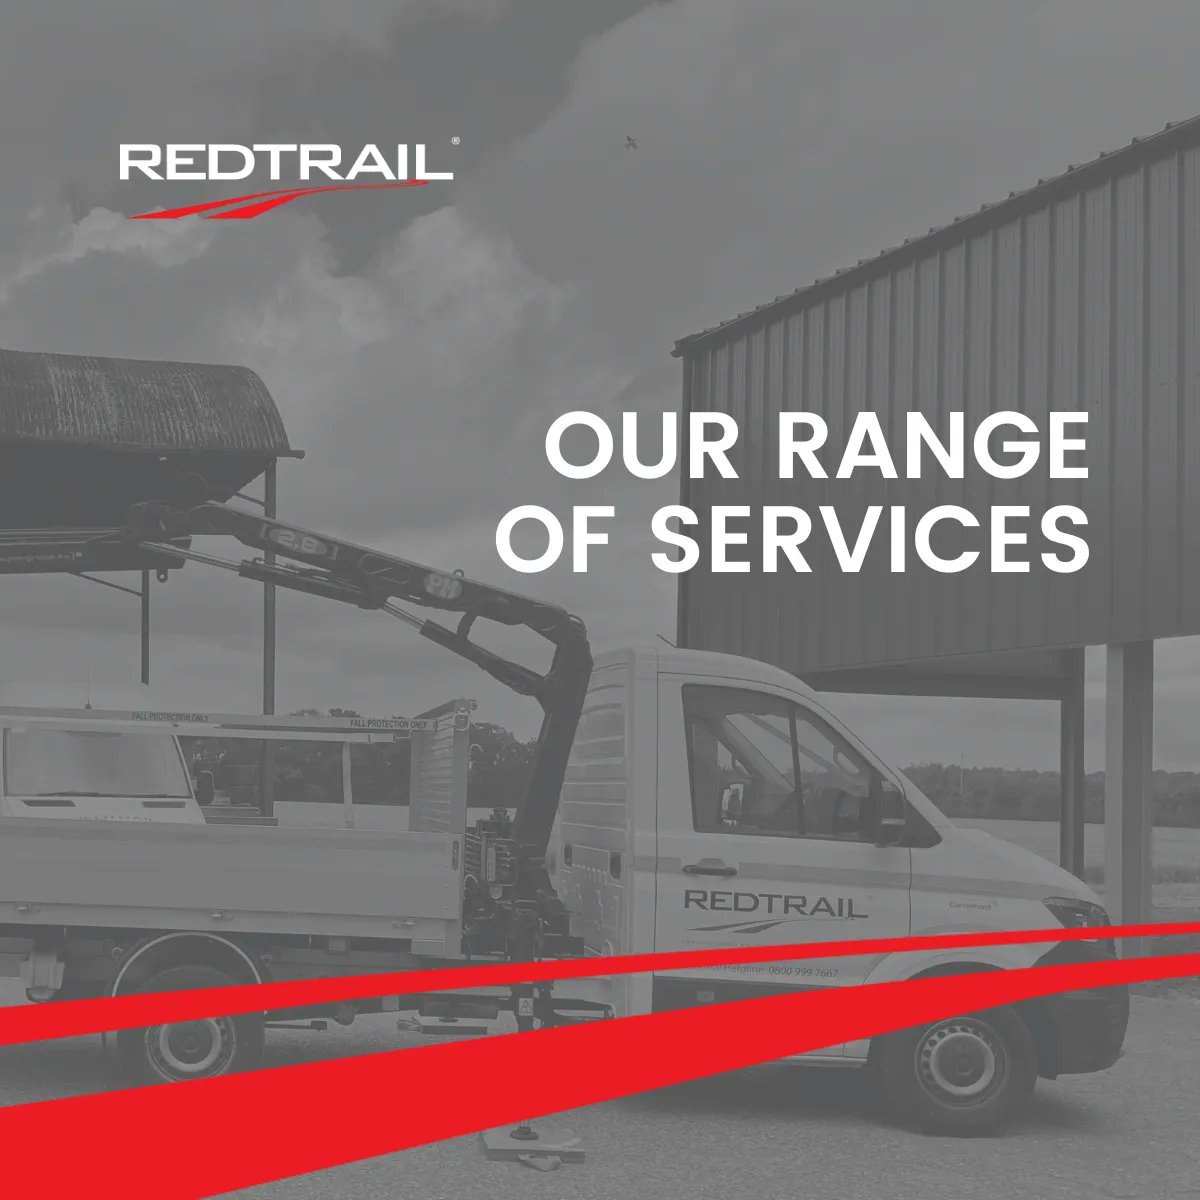 With Redtrail, you can be confident that you're in safe hands. We're proud to be flexible, professional and we get it right first time. Browse our extensive range of services on our easy-to-use website: buff.ly/3MjrWOg

#transport #lastmile #telecoms